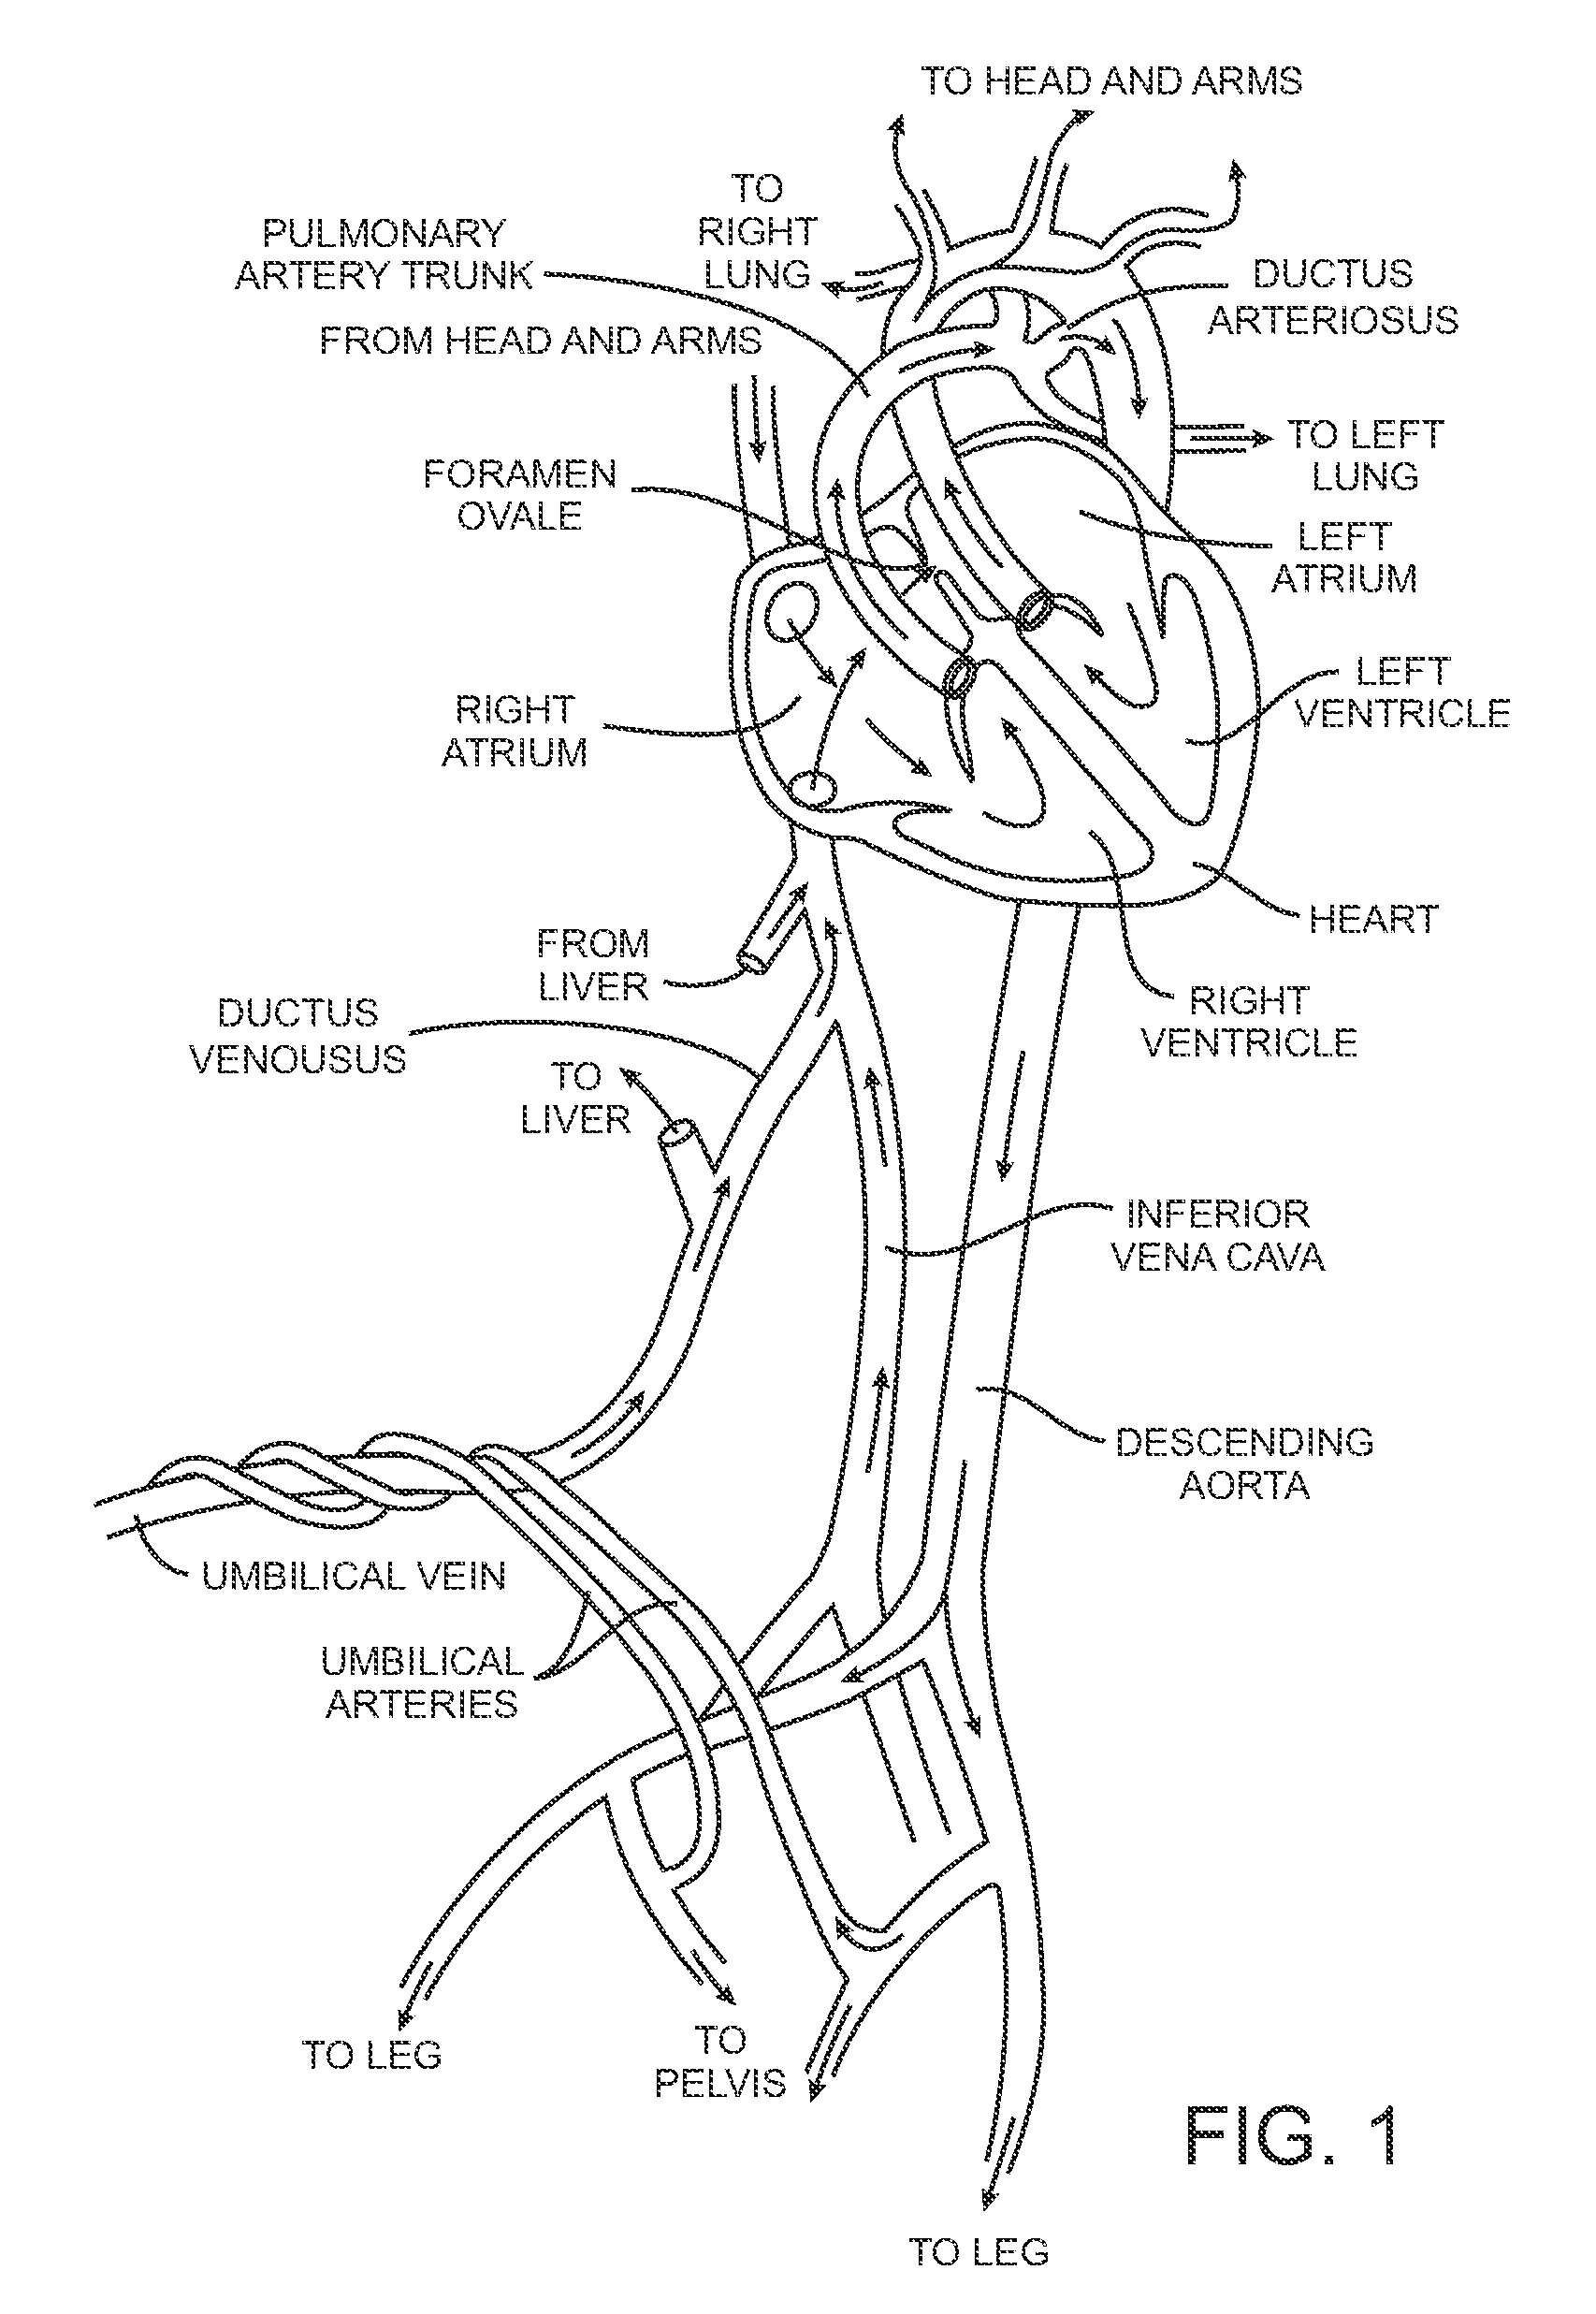 Energy based devices and methods for treatment of anatomic tissue defects